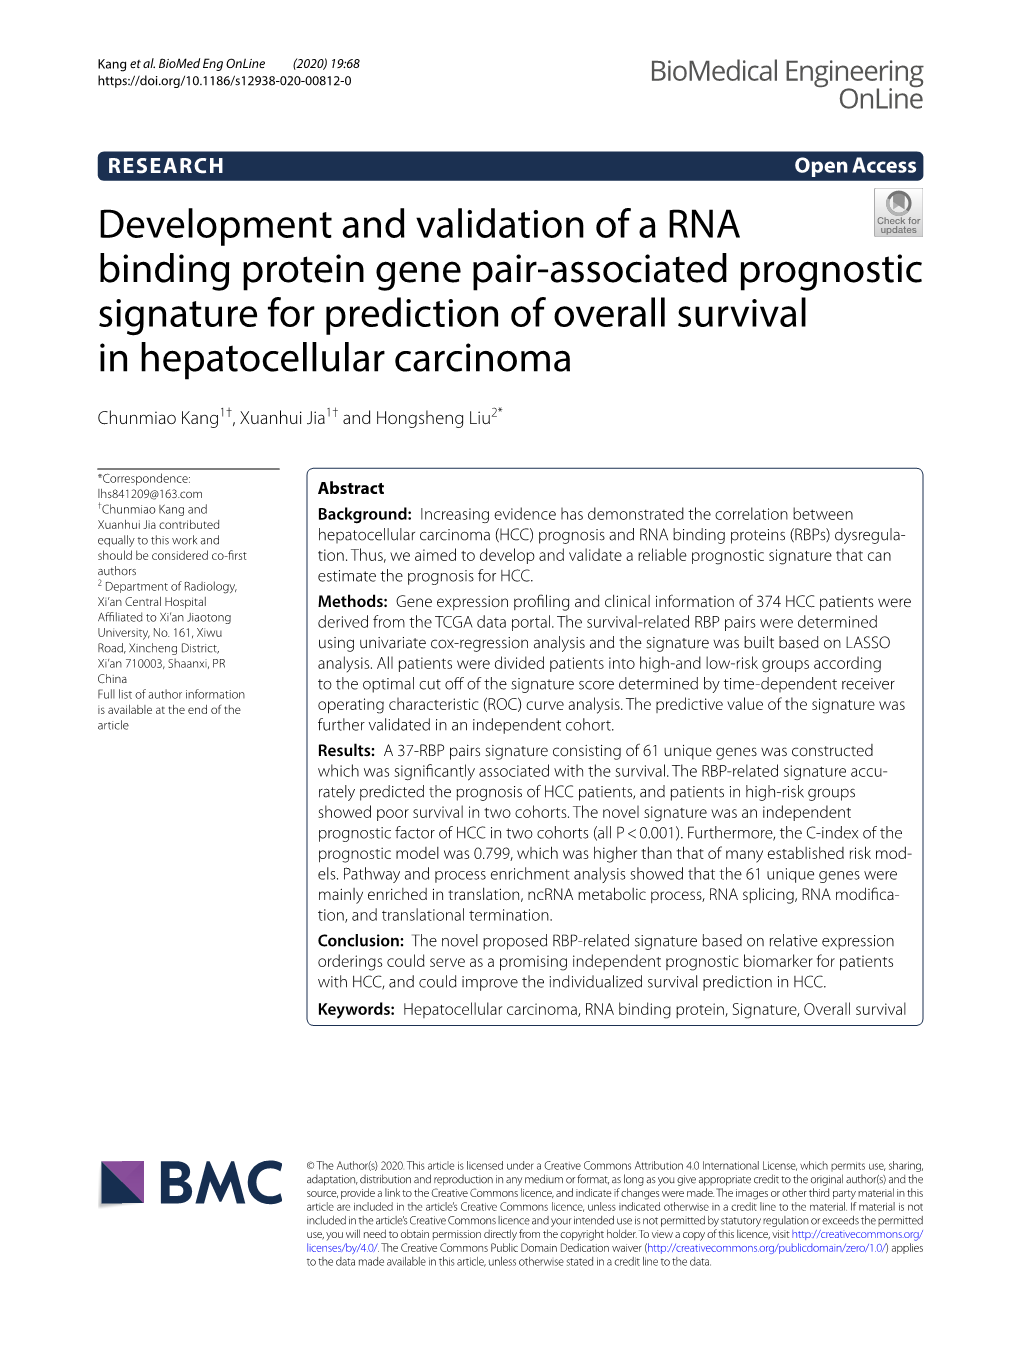 Development and Validation of a RNA Binding Protein Gene Pair‑Associated Prognostic Signature for Prediction of Overall Survival in Hepatocellular Carcinoma